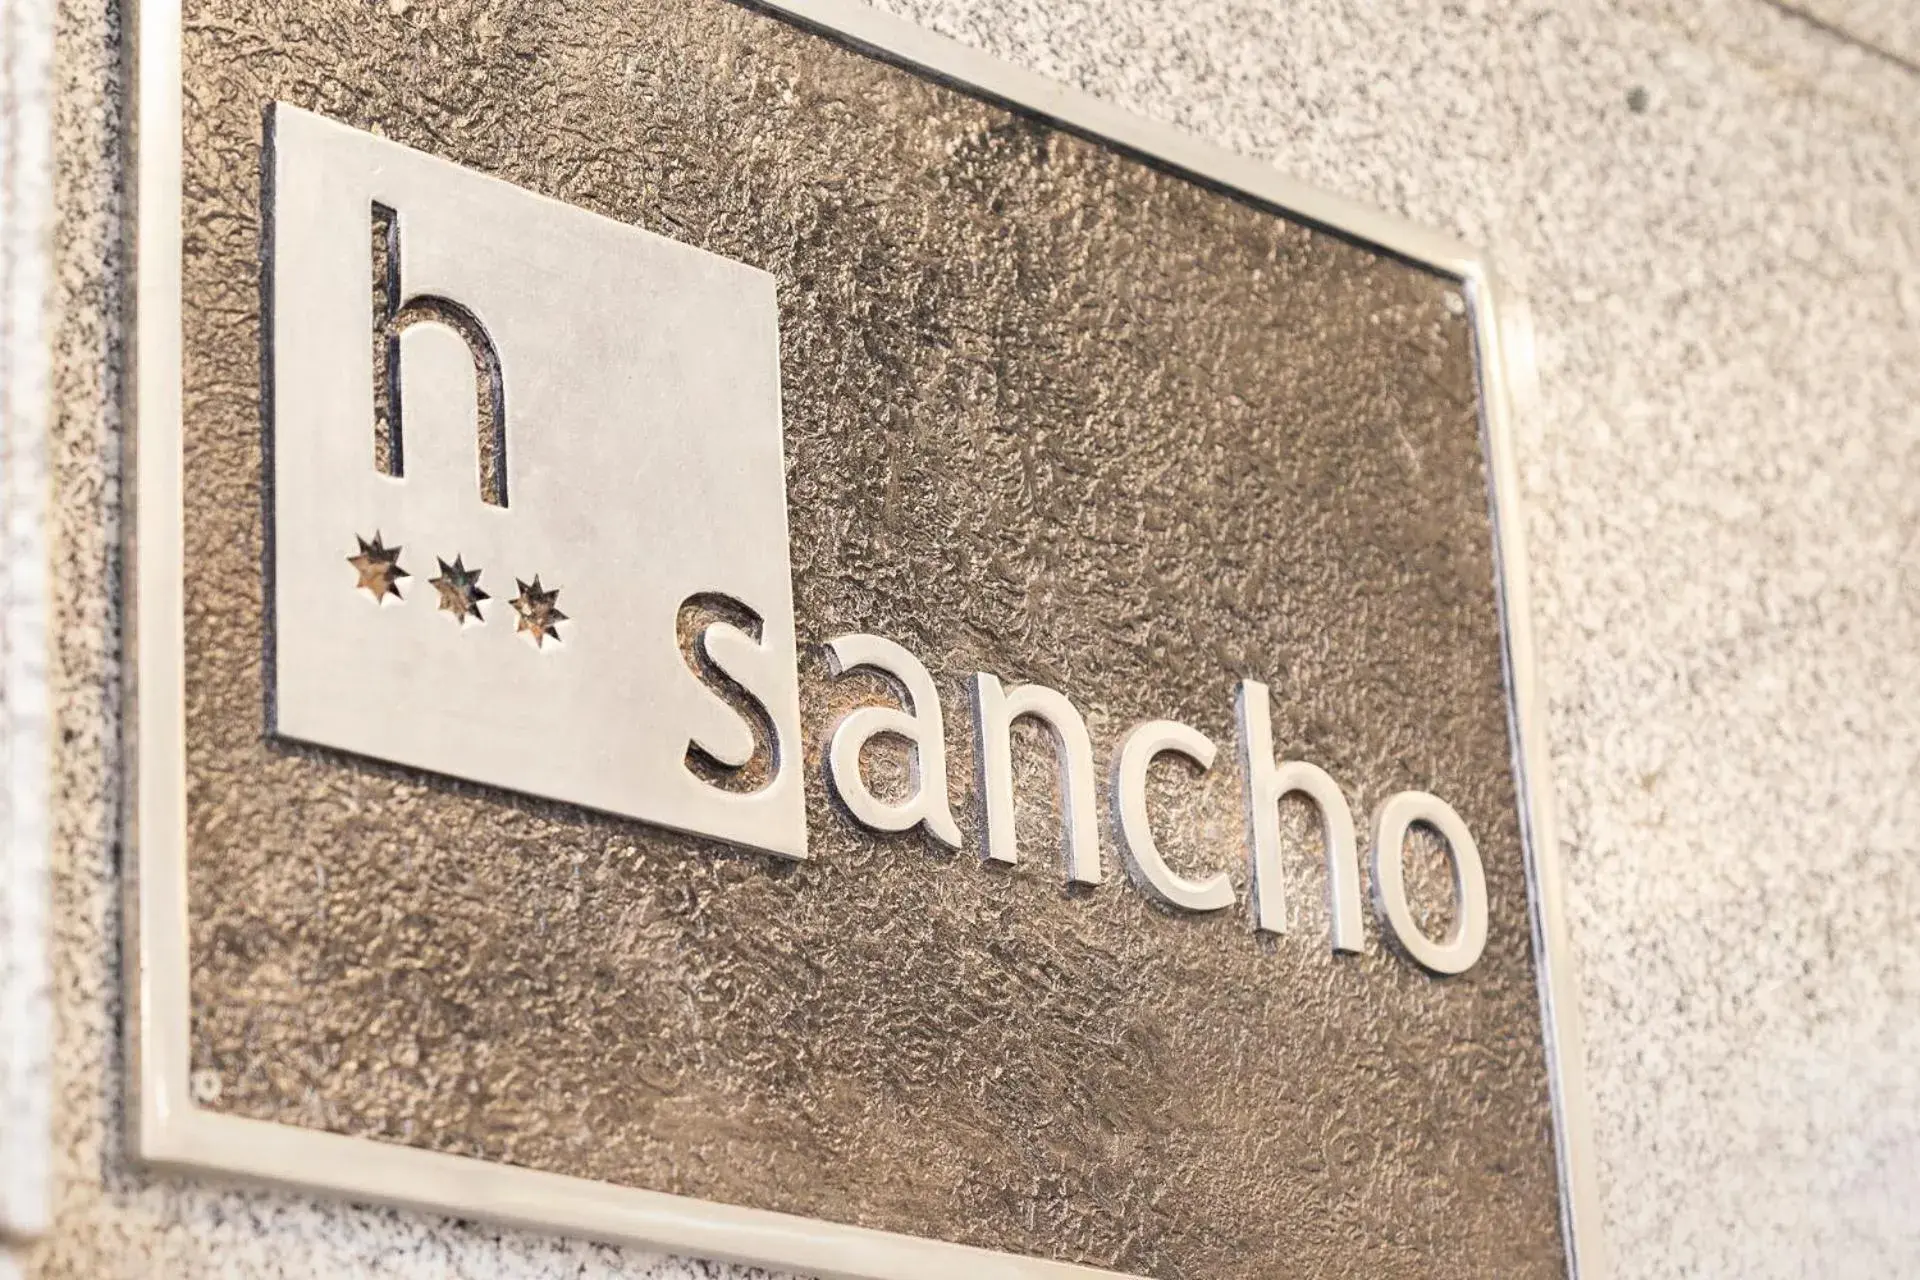 Property logo or sign in Hotel Sancho